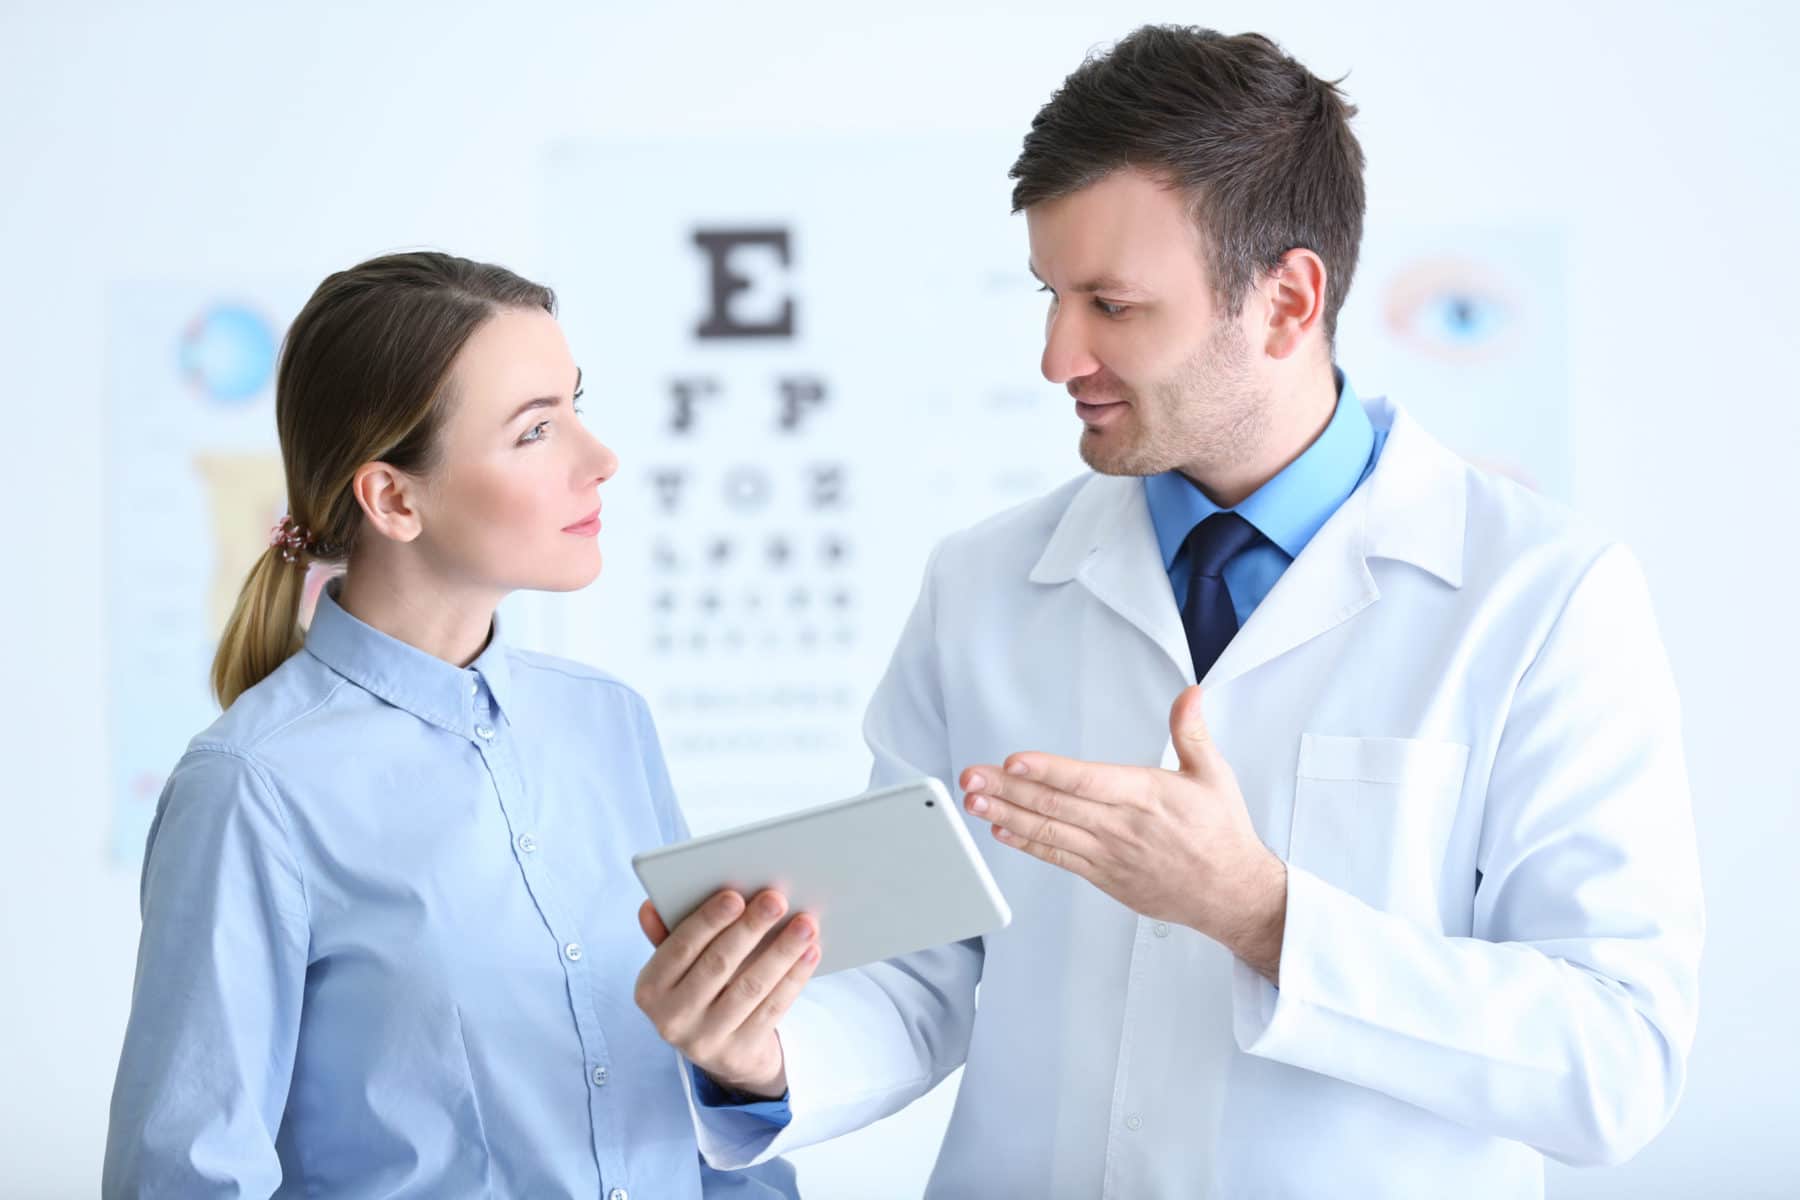 Patient asking eye doctor questions